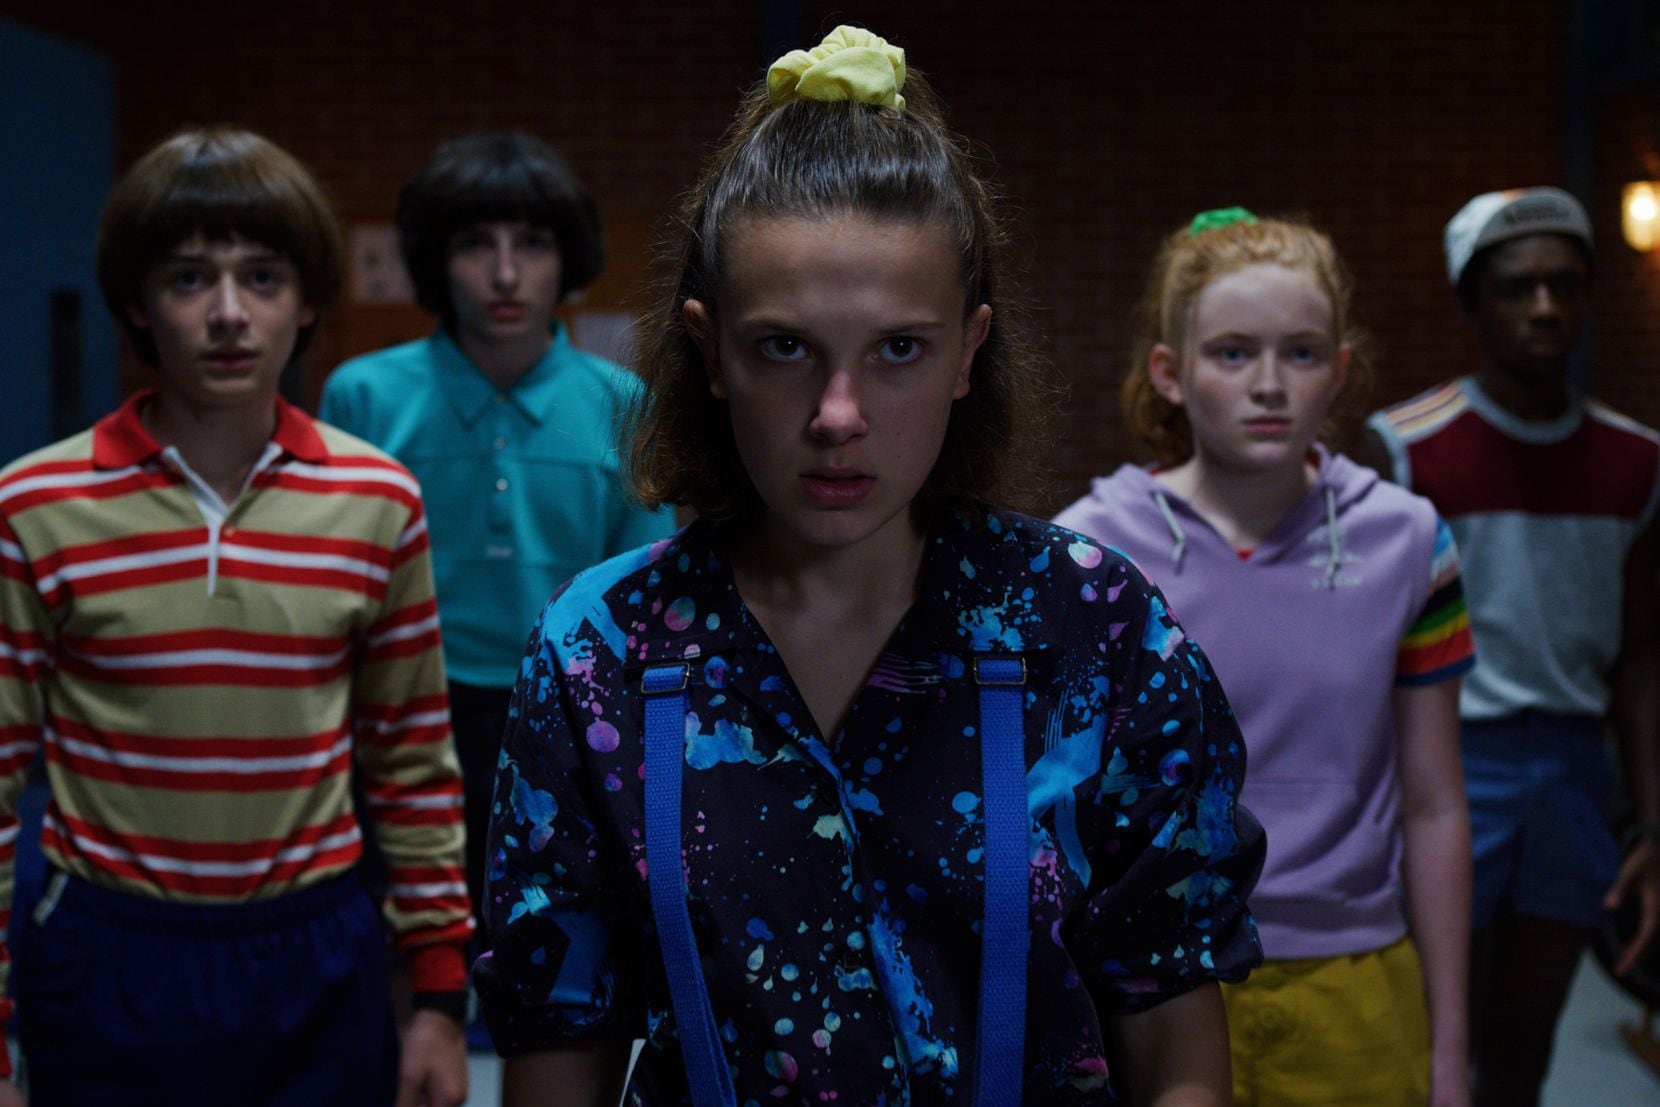 Stranger Things: 10 Reasons Why Nancy & Barb Aren't Real Friends